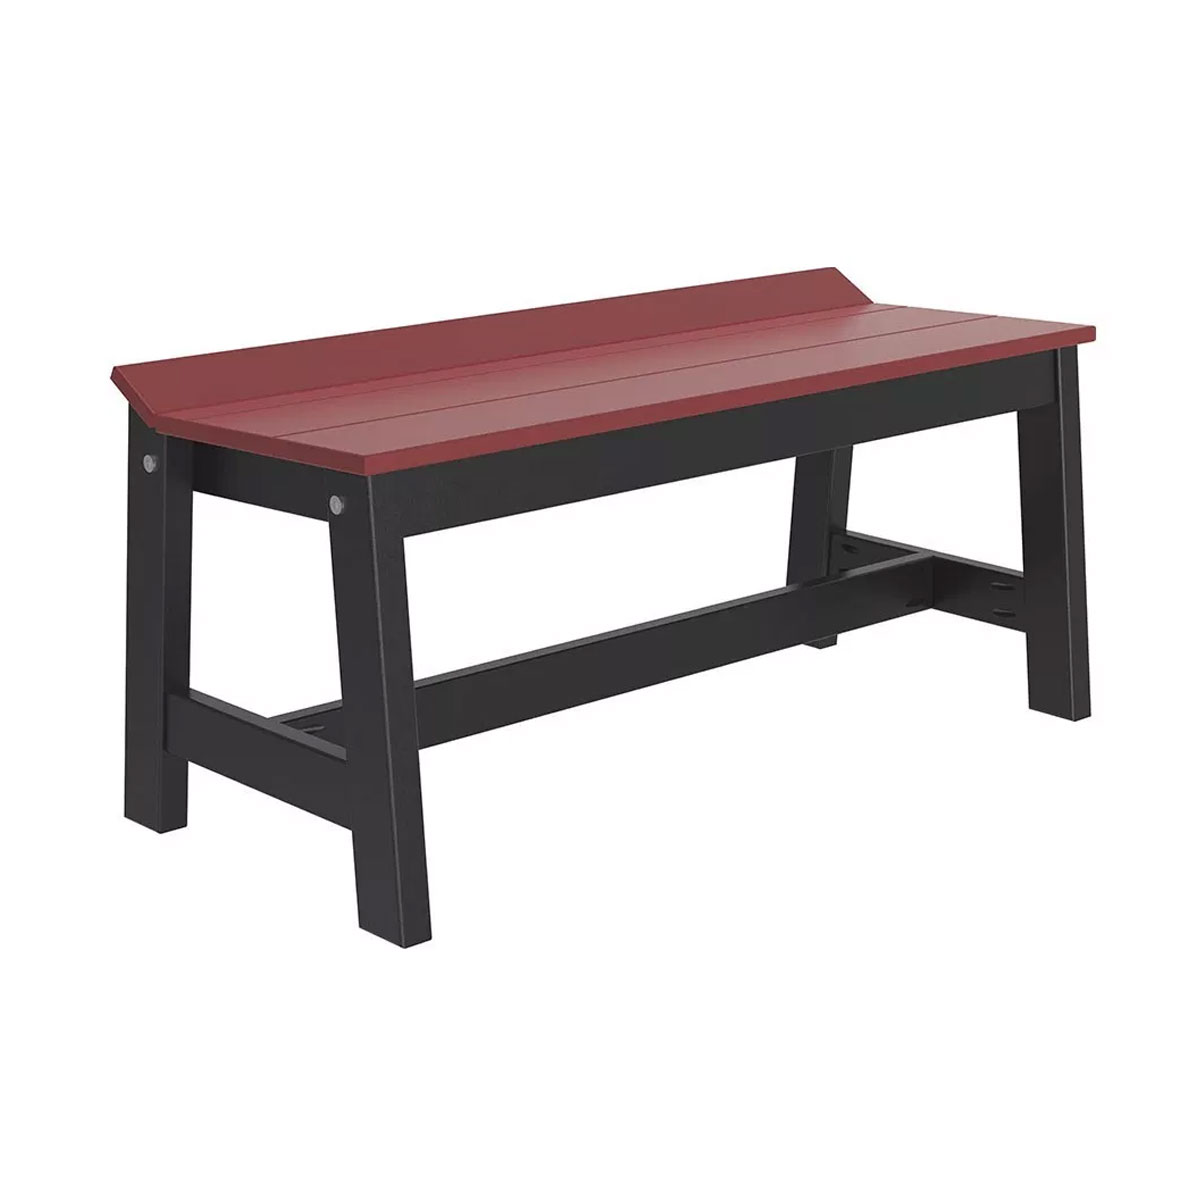 41 inch Cafe Dining Bench 